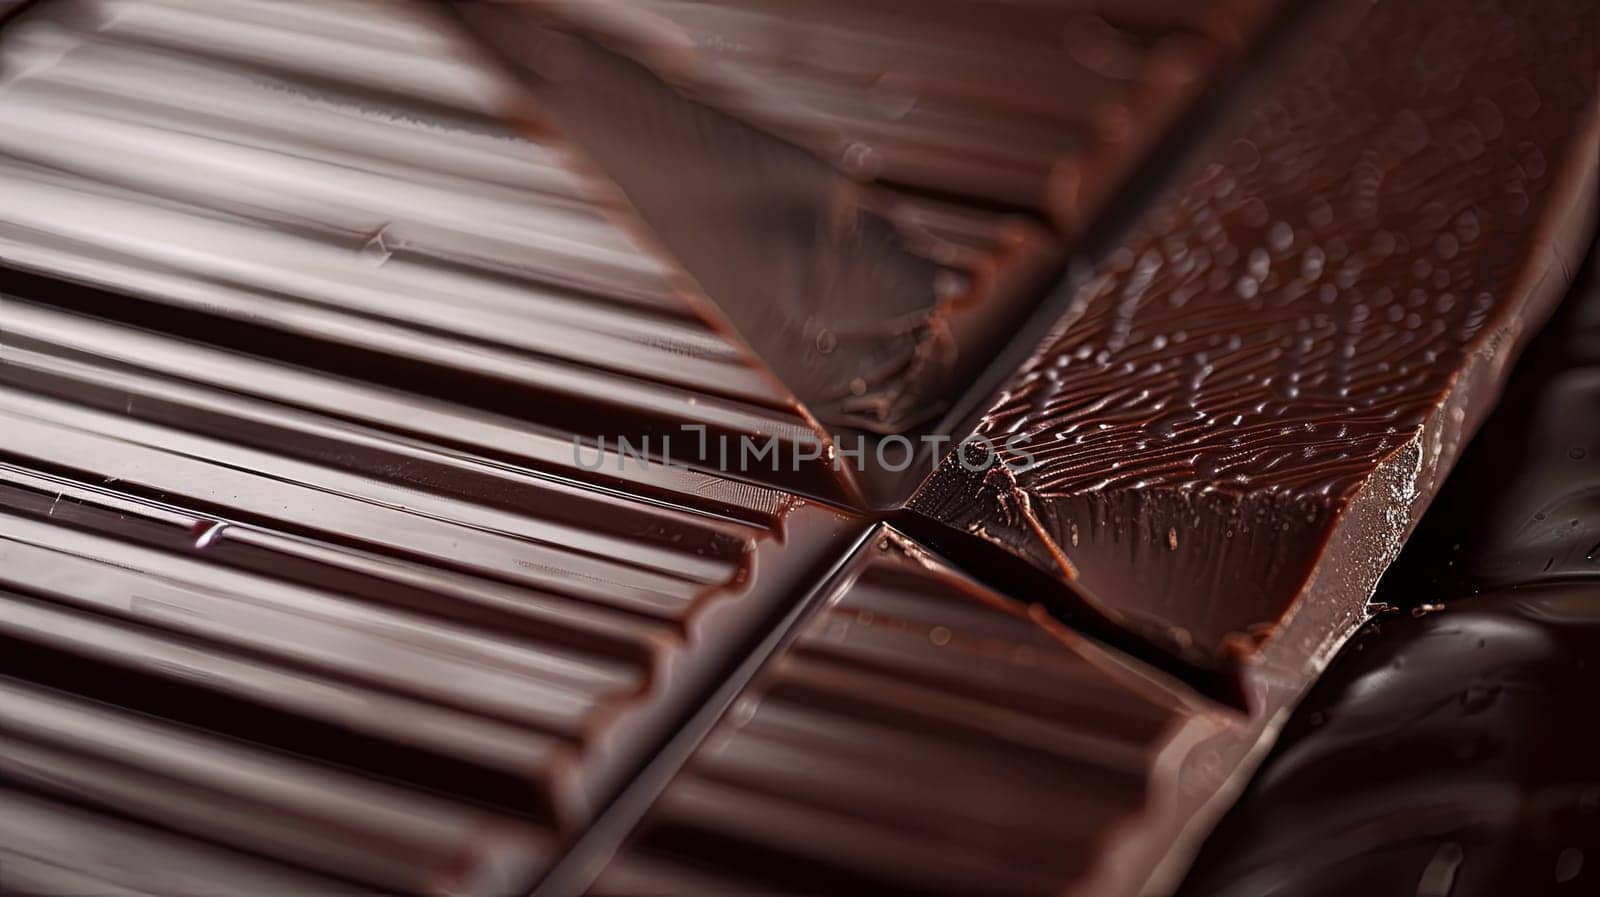 Detailed close-up of a dark chocolate bar showing break lines and smooth, even surface.